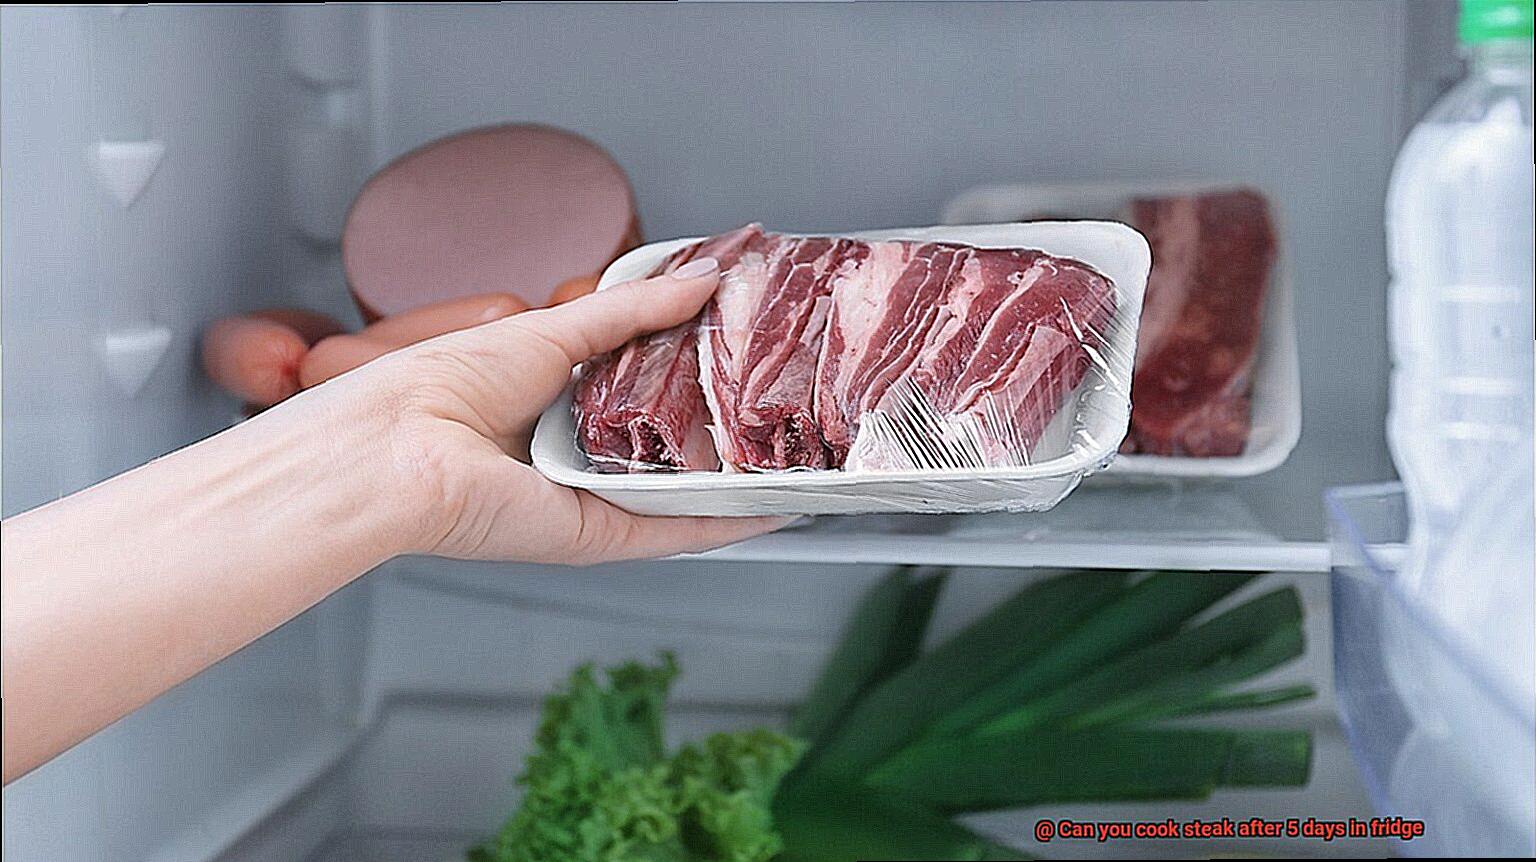 Can you cook steak after 5 days in fridge-5